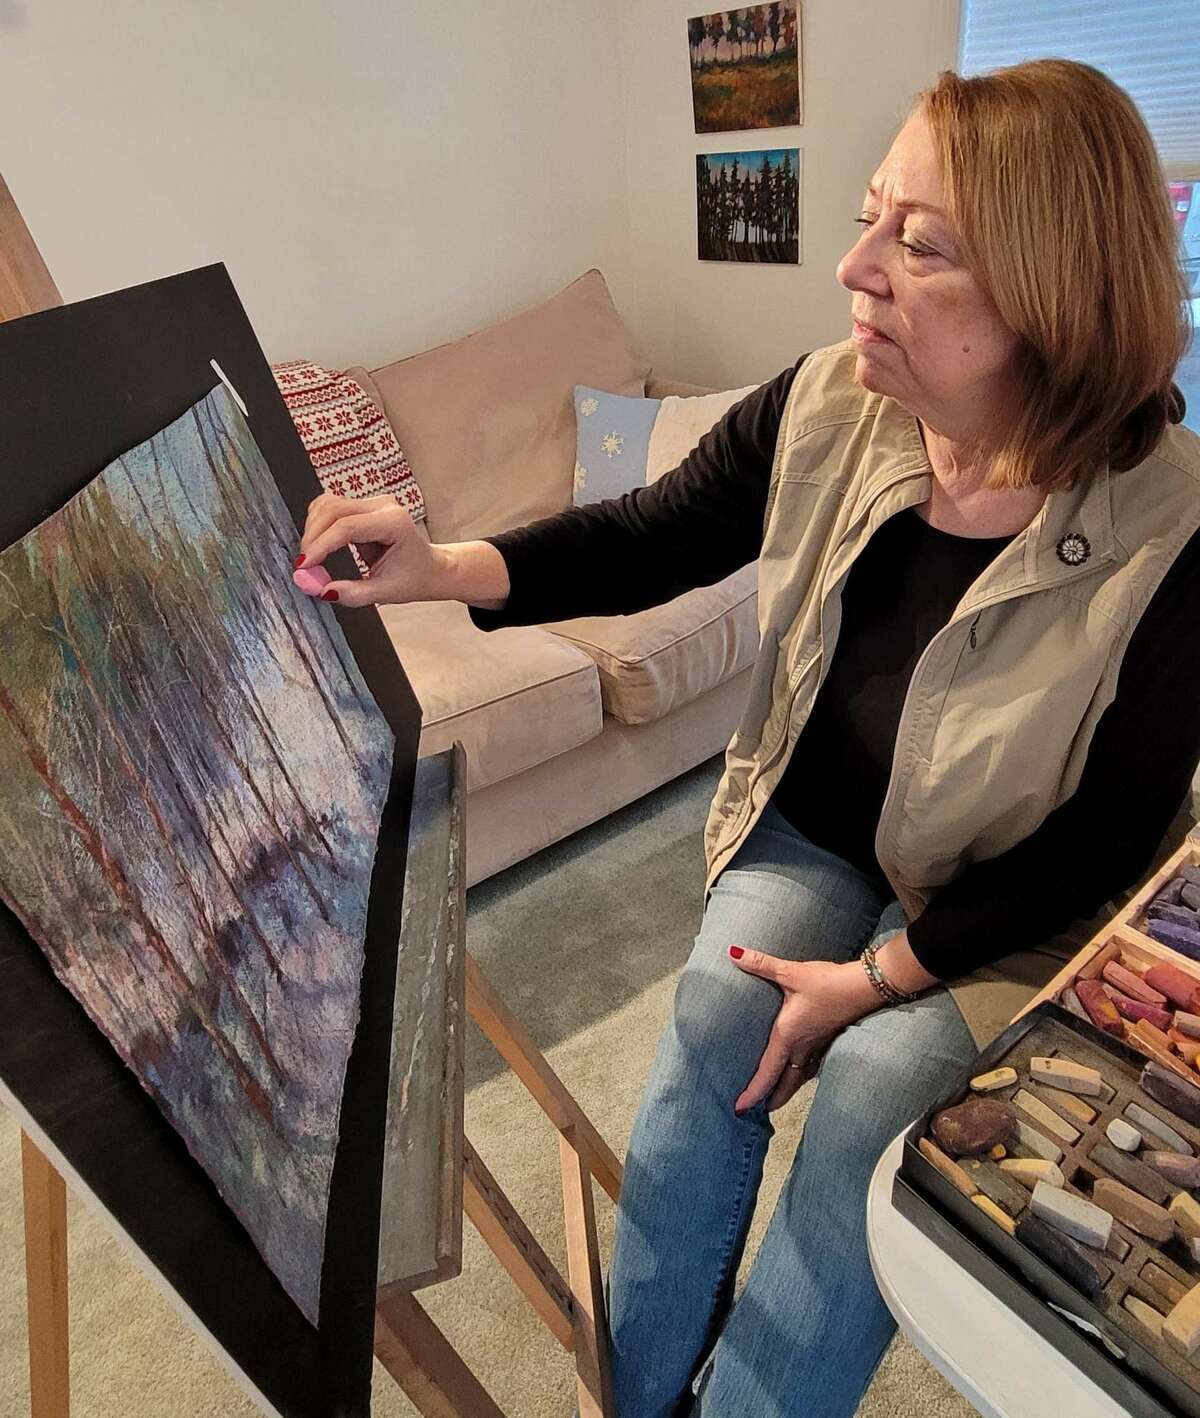 Nancy Knapp is a Caseville resident and is a pastel artist, using the natural beauty of the Thumb to inspire her paintings that she shares with the community.